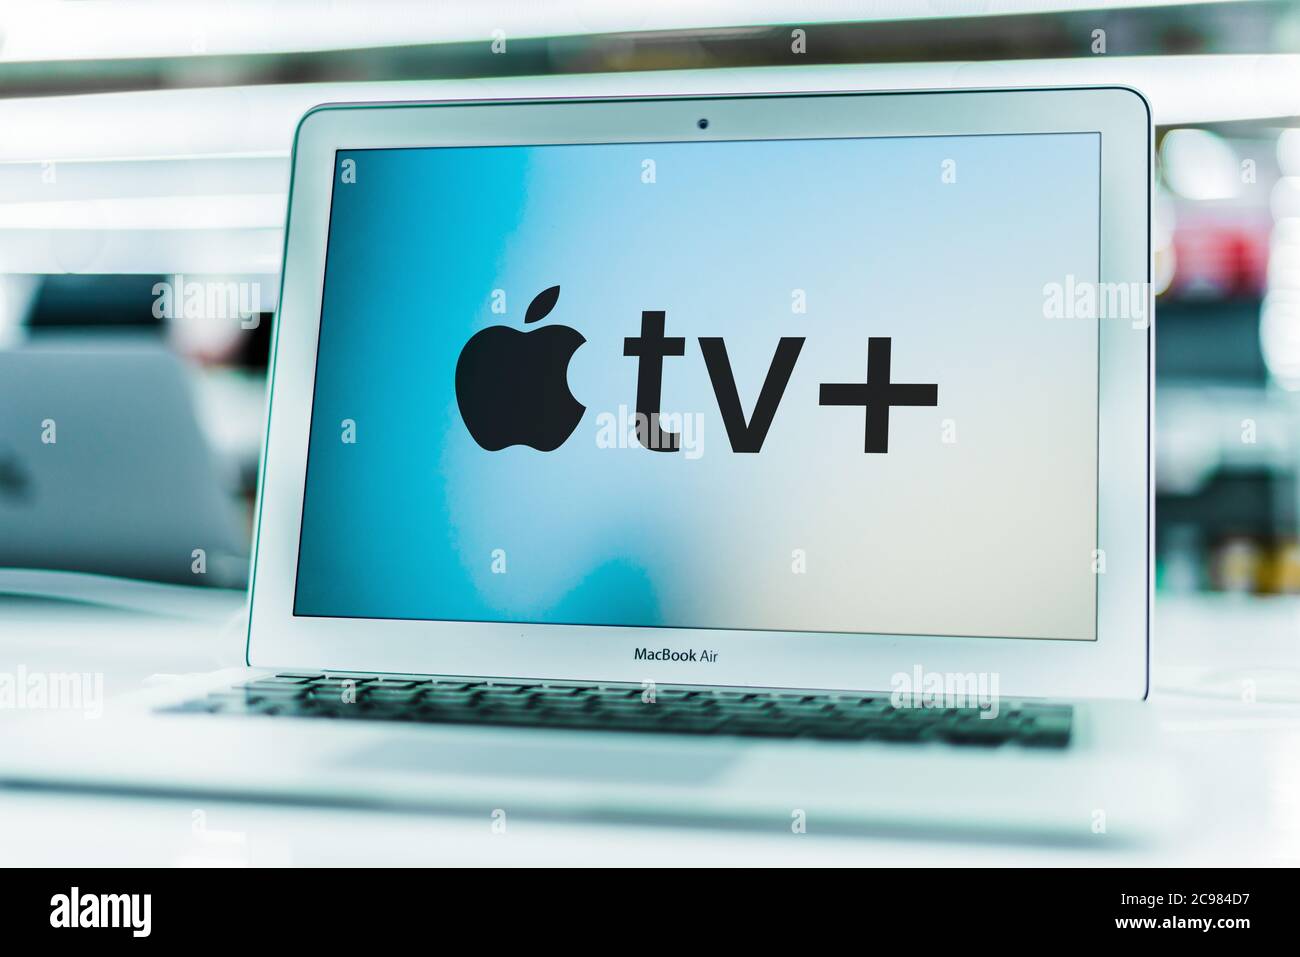 POZNAN, POL - JUN 16, 2020 Laptop computer displaying logo of Apple TV+, an ad-free subscription video on demand web television service of Apple Inc Stock Photo